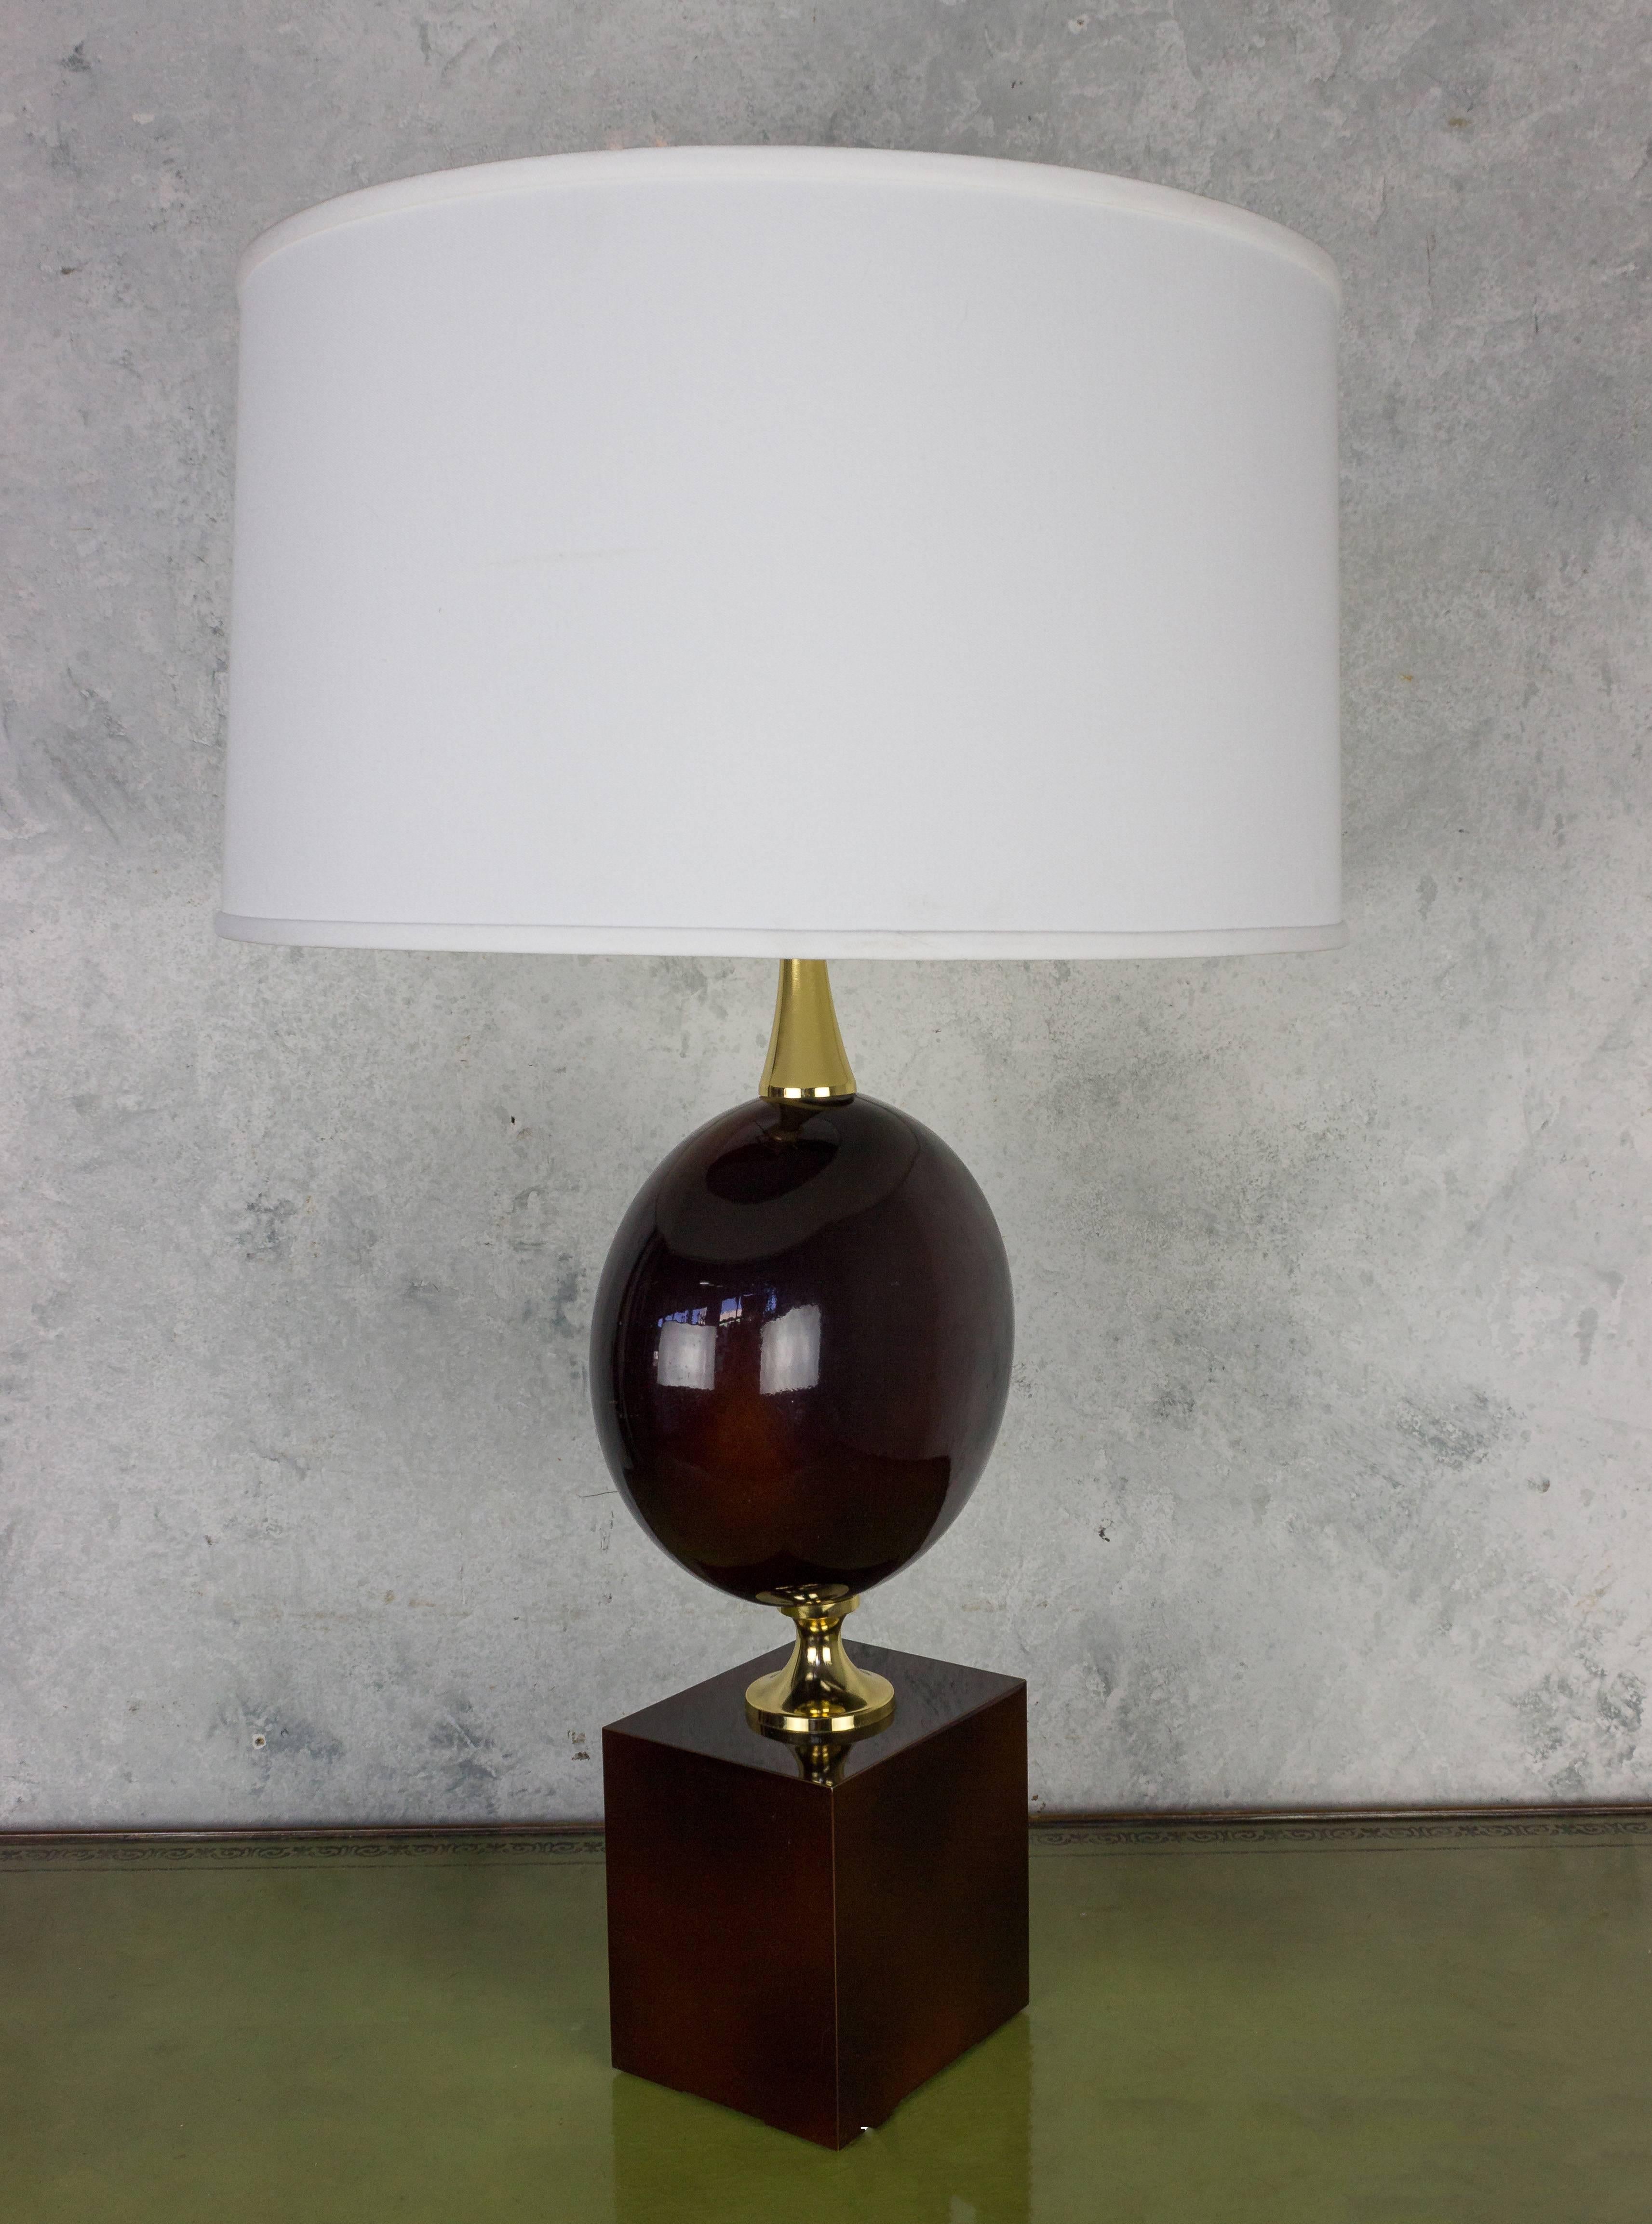 French table lamp made by Maison Barbier, circa 1970s. The lamp has two main parts, one elliptical and the other rectangular, in eggplant colored enameled brass, the two parts being separated with a brass spacer support. The lamp has not been